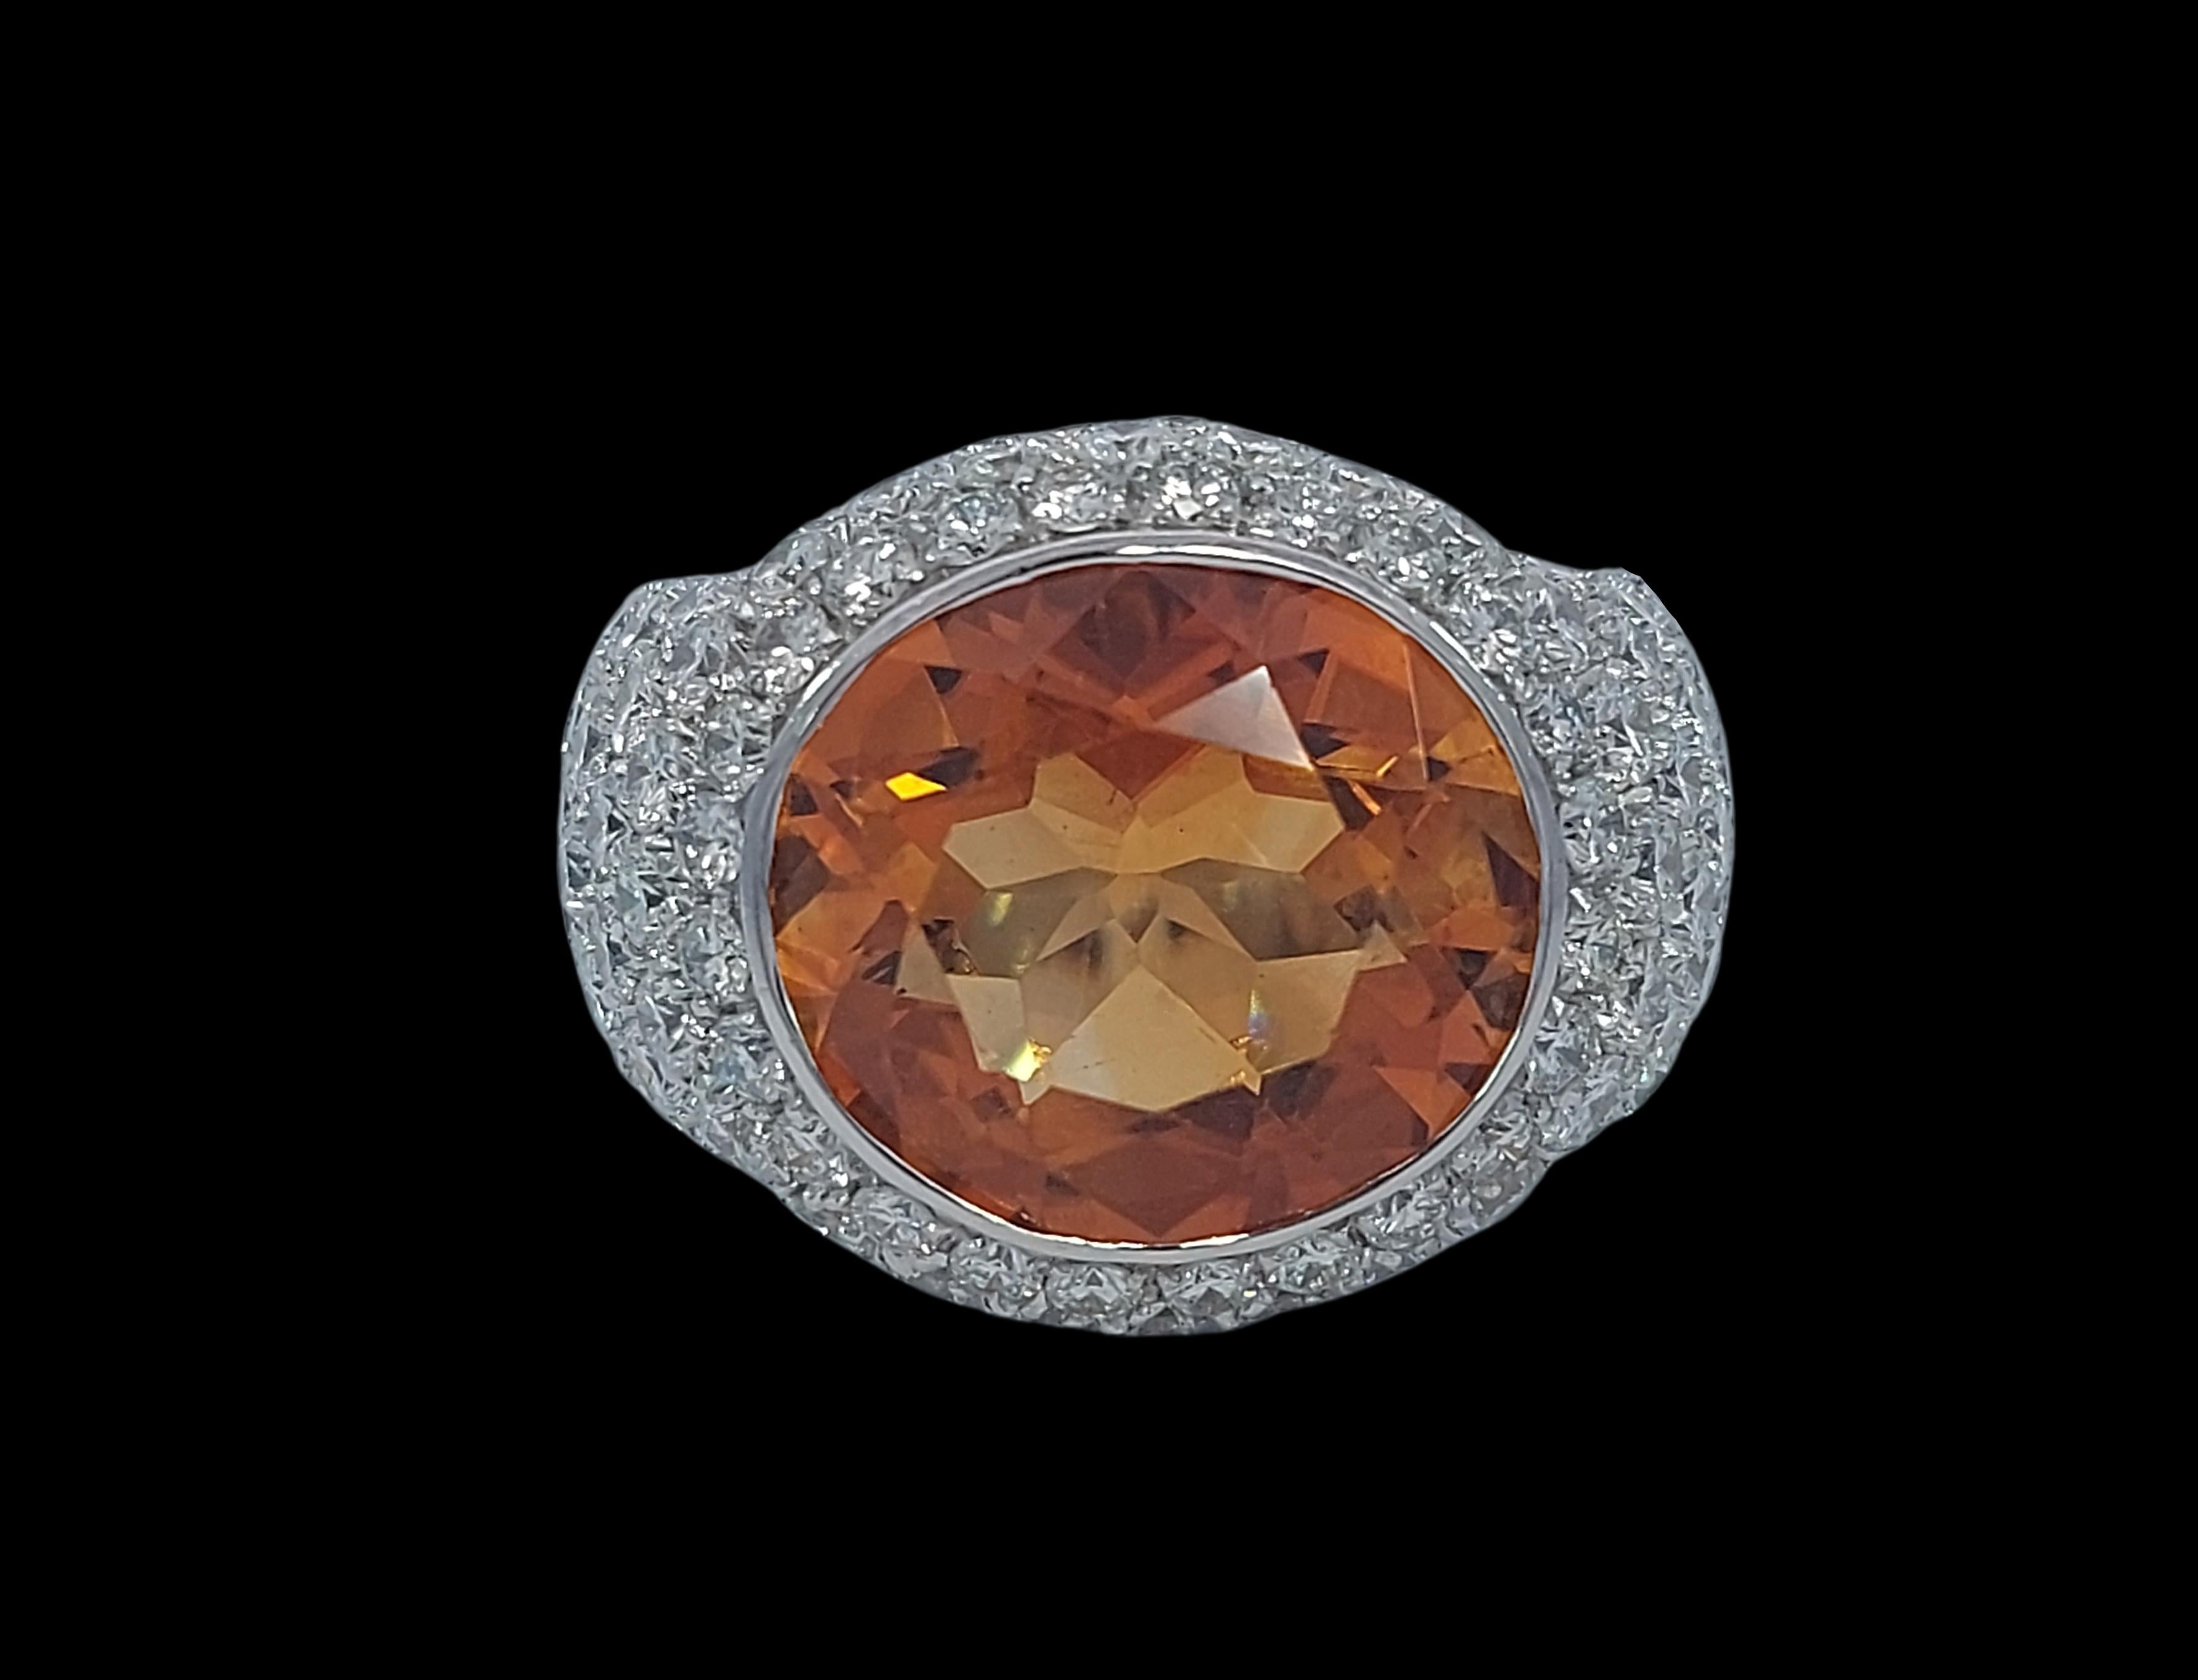 Stunning 18kt Solid White Gold Ring with 6.4ct Diamonds and Big Citrine Stone For Sale 7